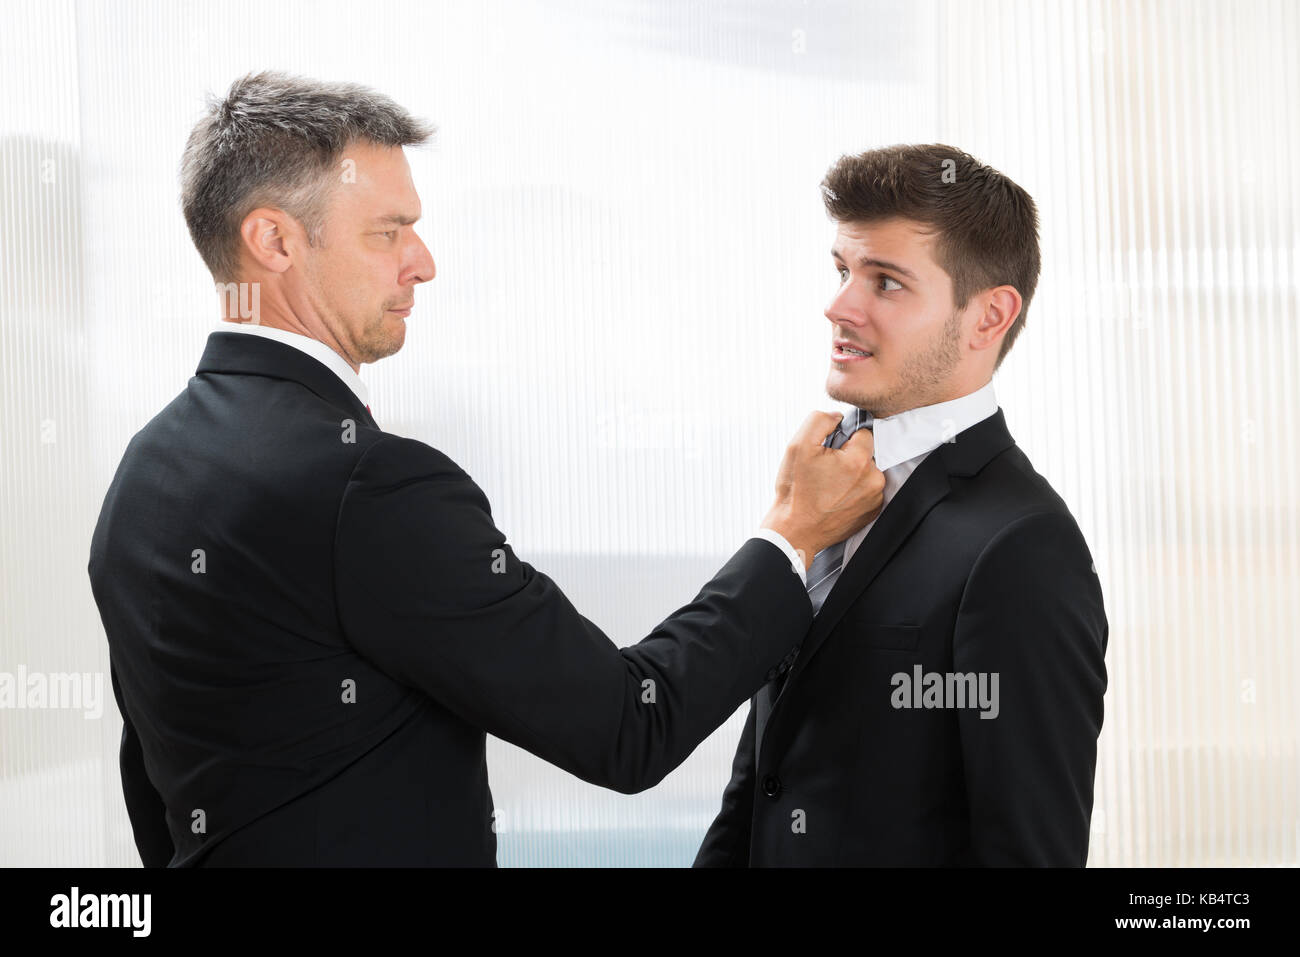 Portrait Of Angry Businessman Holding Young Businessman's Tie In Office Stock Photo